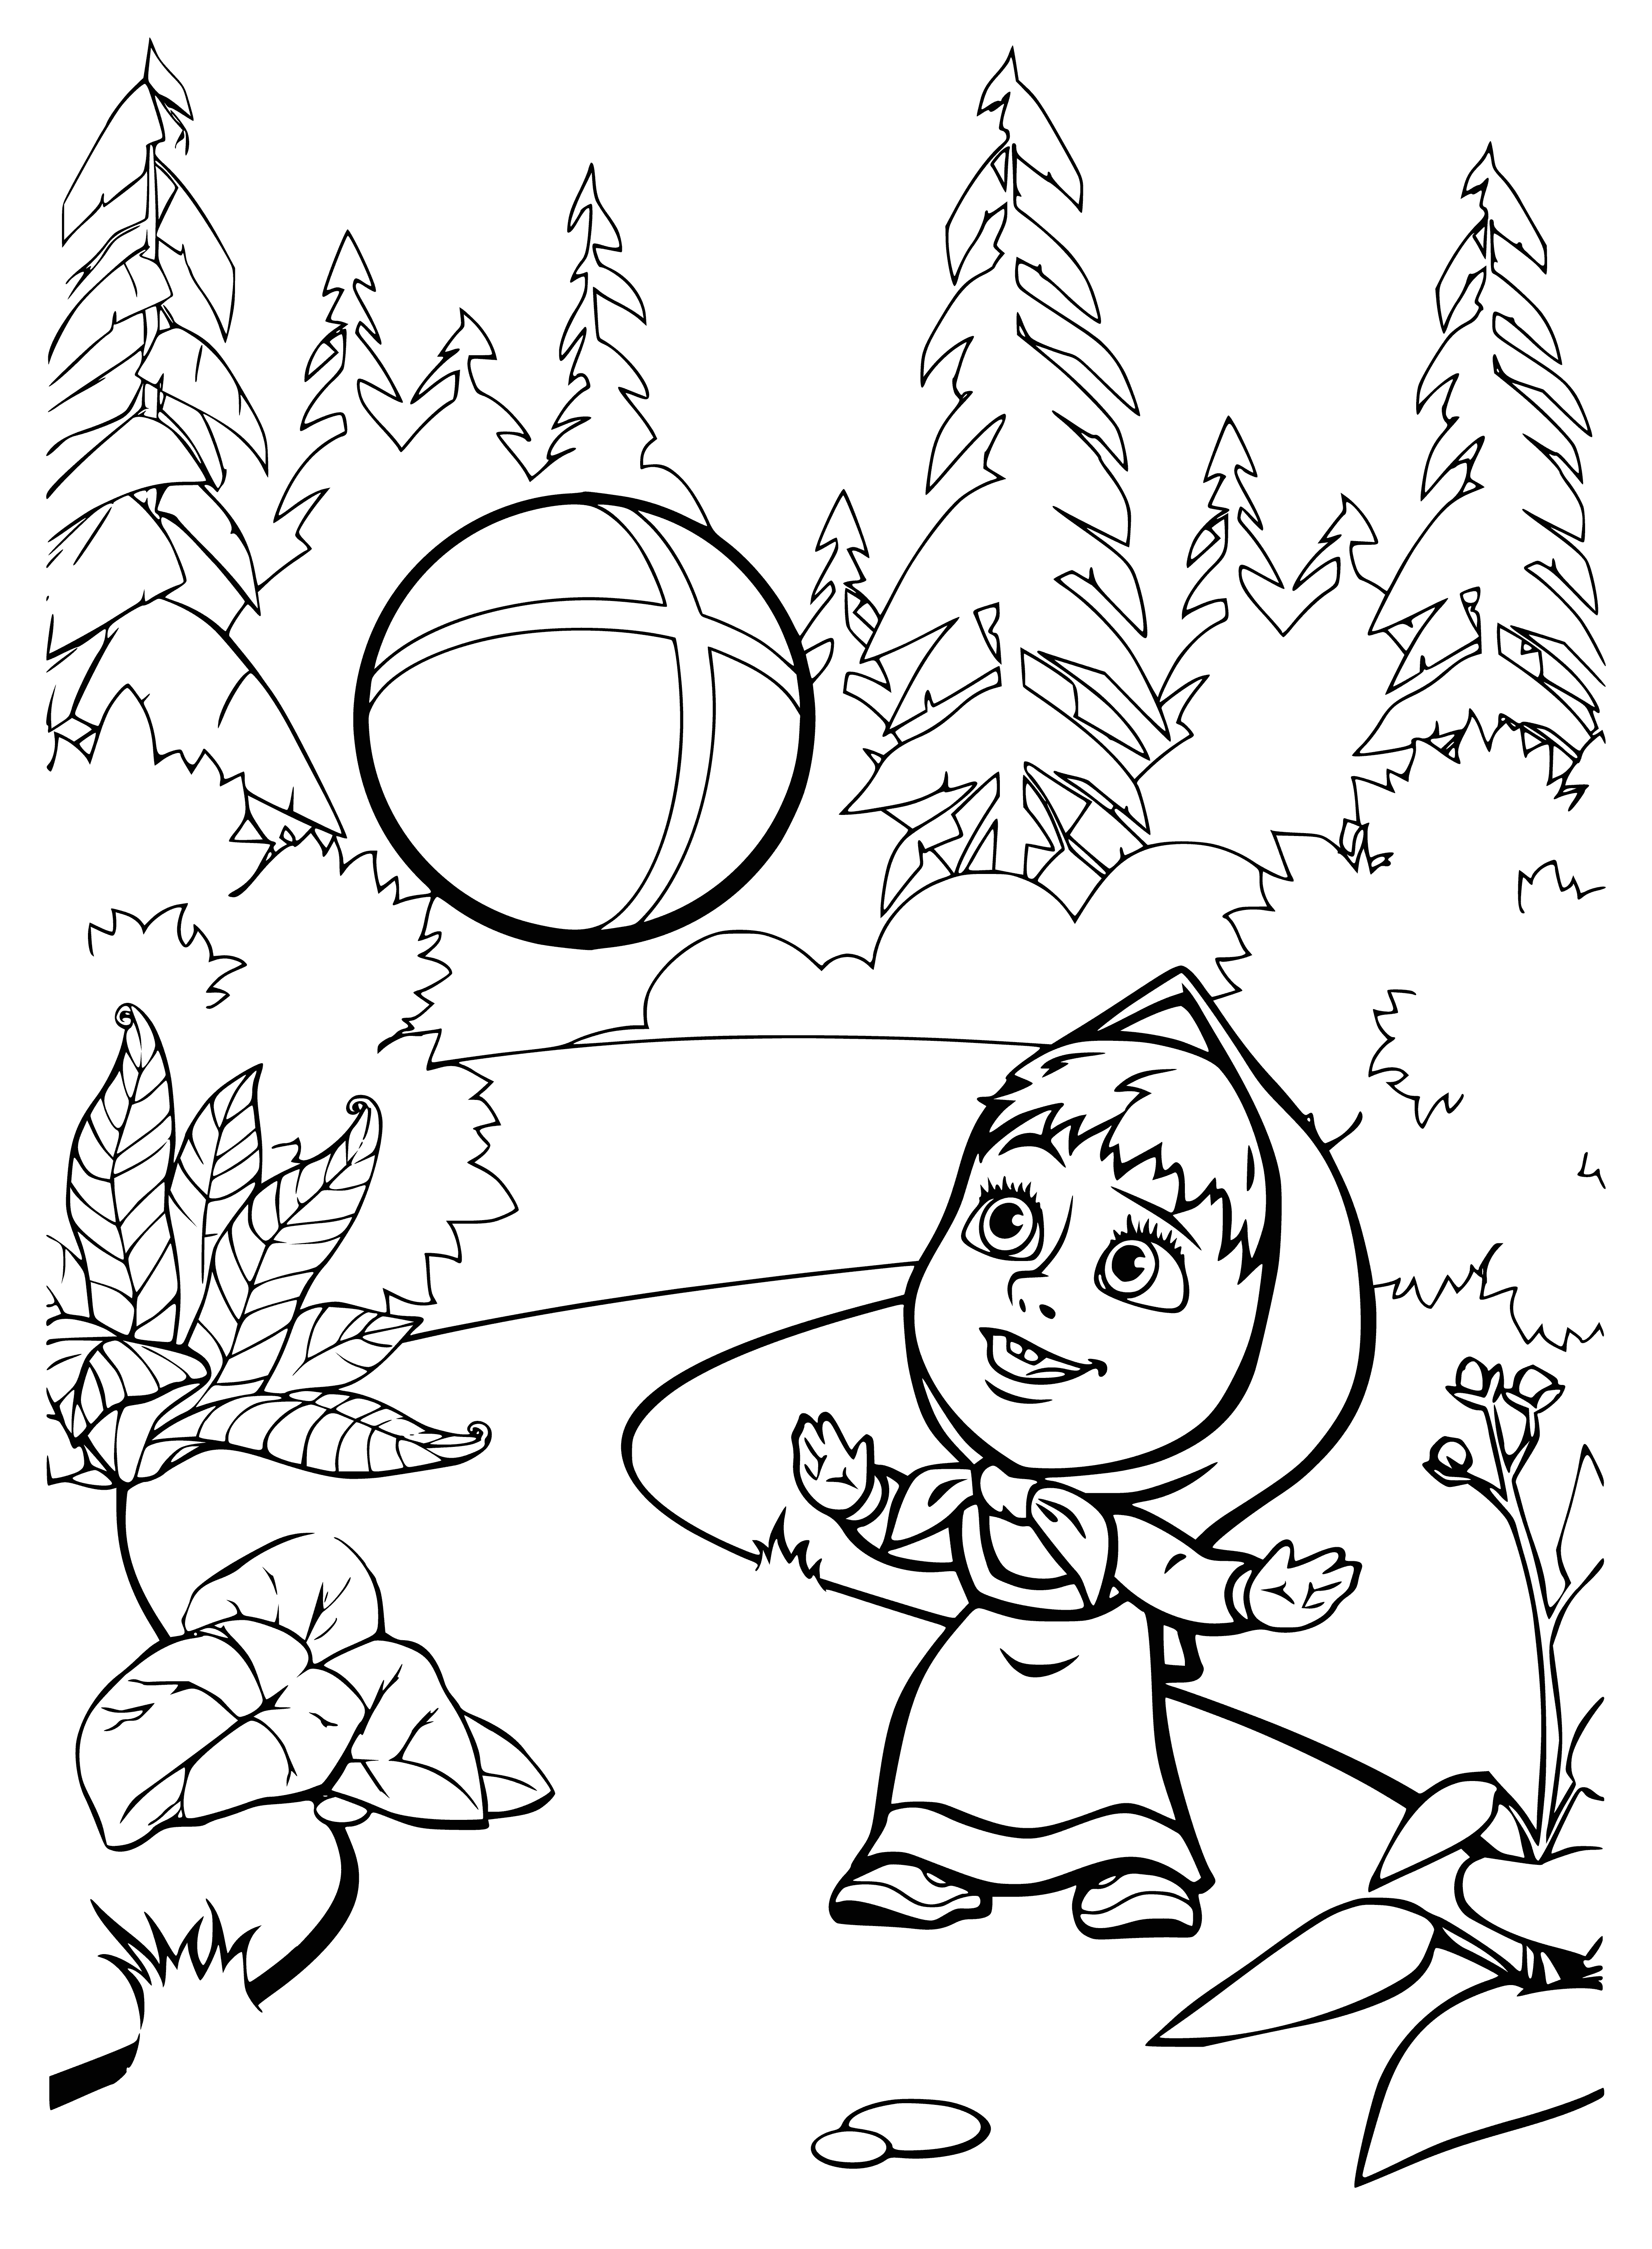 coloring page: Masha, smiling & playful, holds a big ball. She has short, light brown hair & big brown eyes. #coloring #kids #adventures